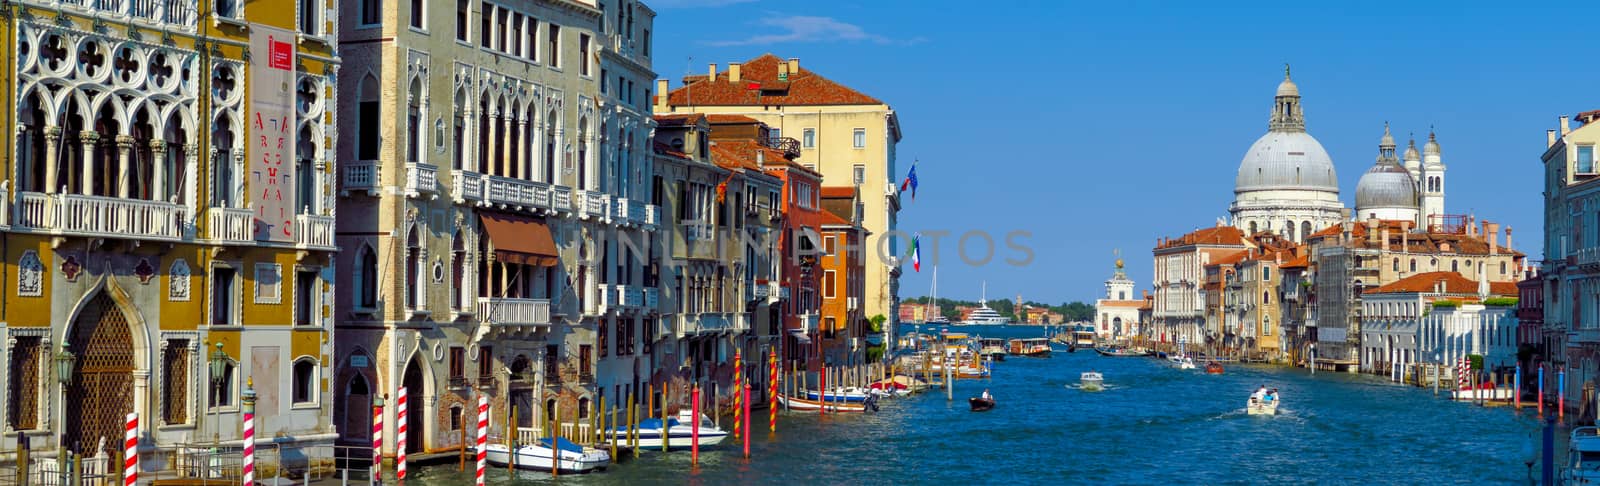 Venice, Italy - June 20, 2017: Panoramic view to old cathedral of Santa Maria della Salute in Venice, Italy.